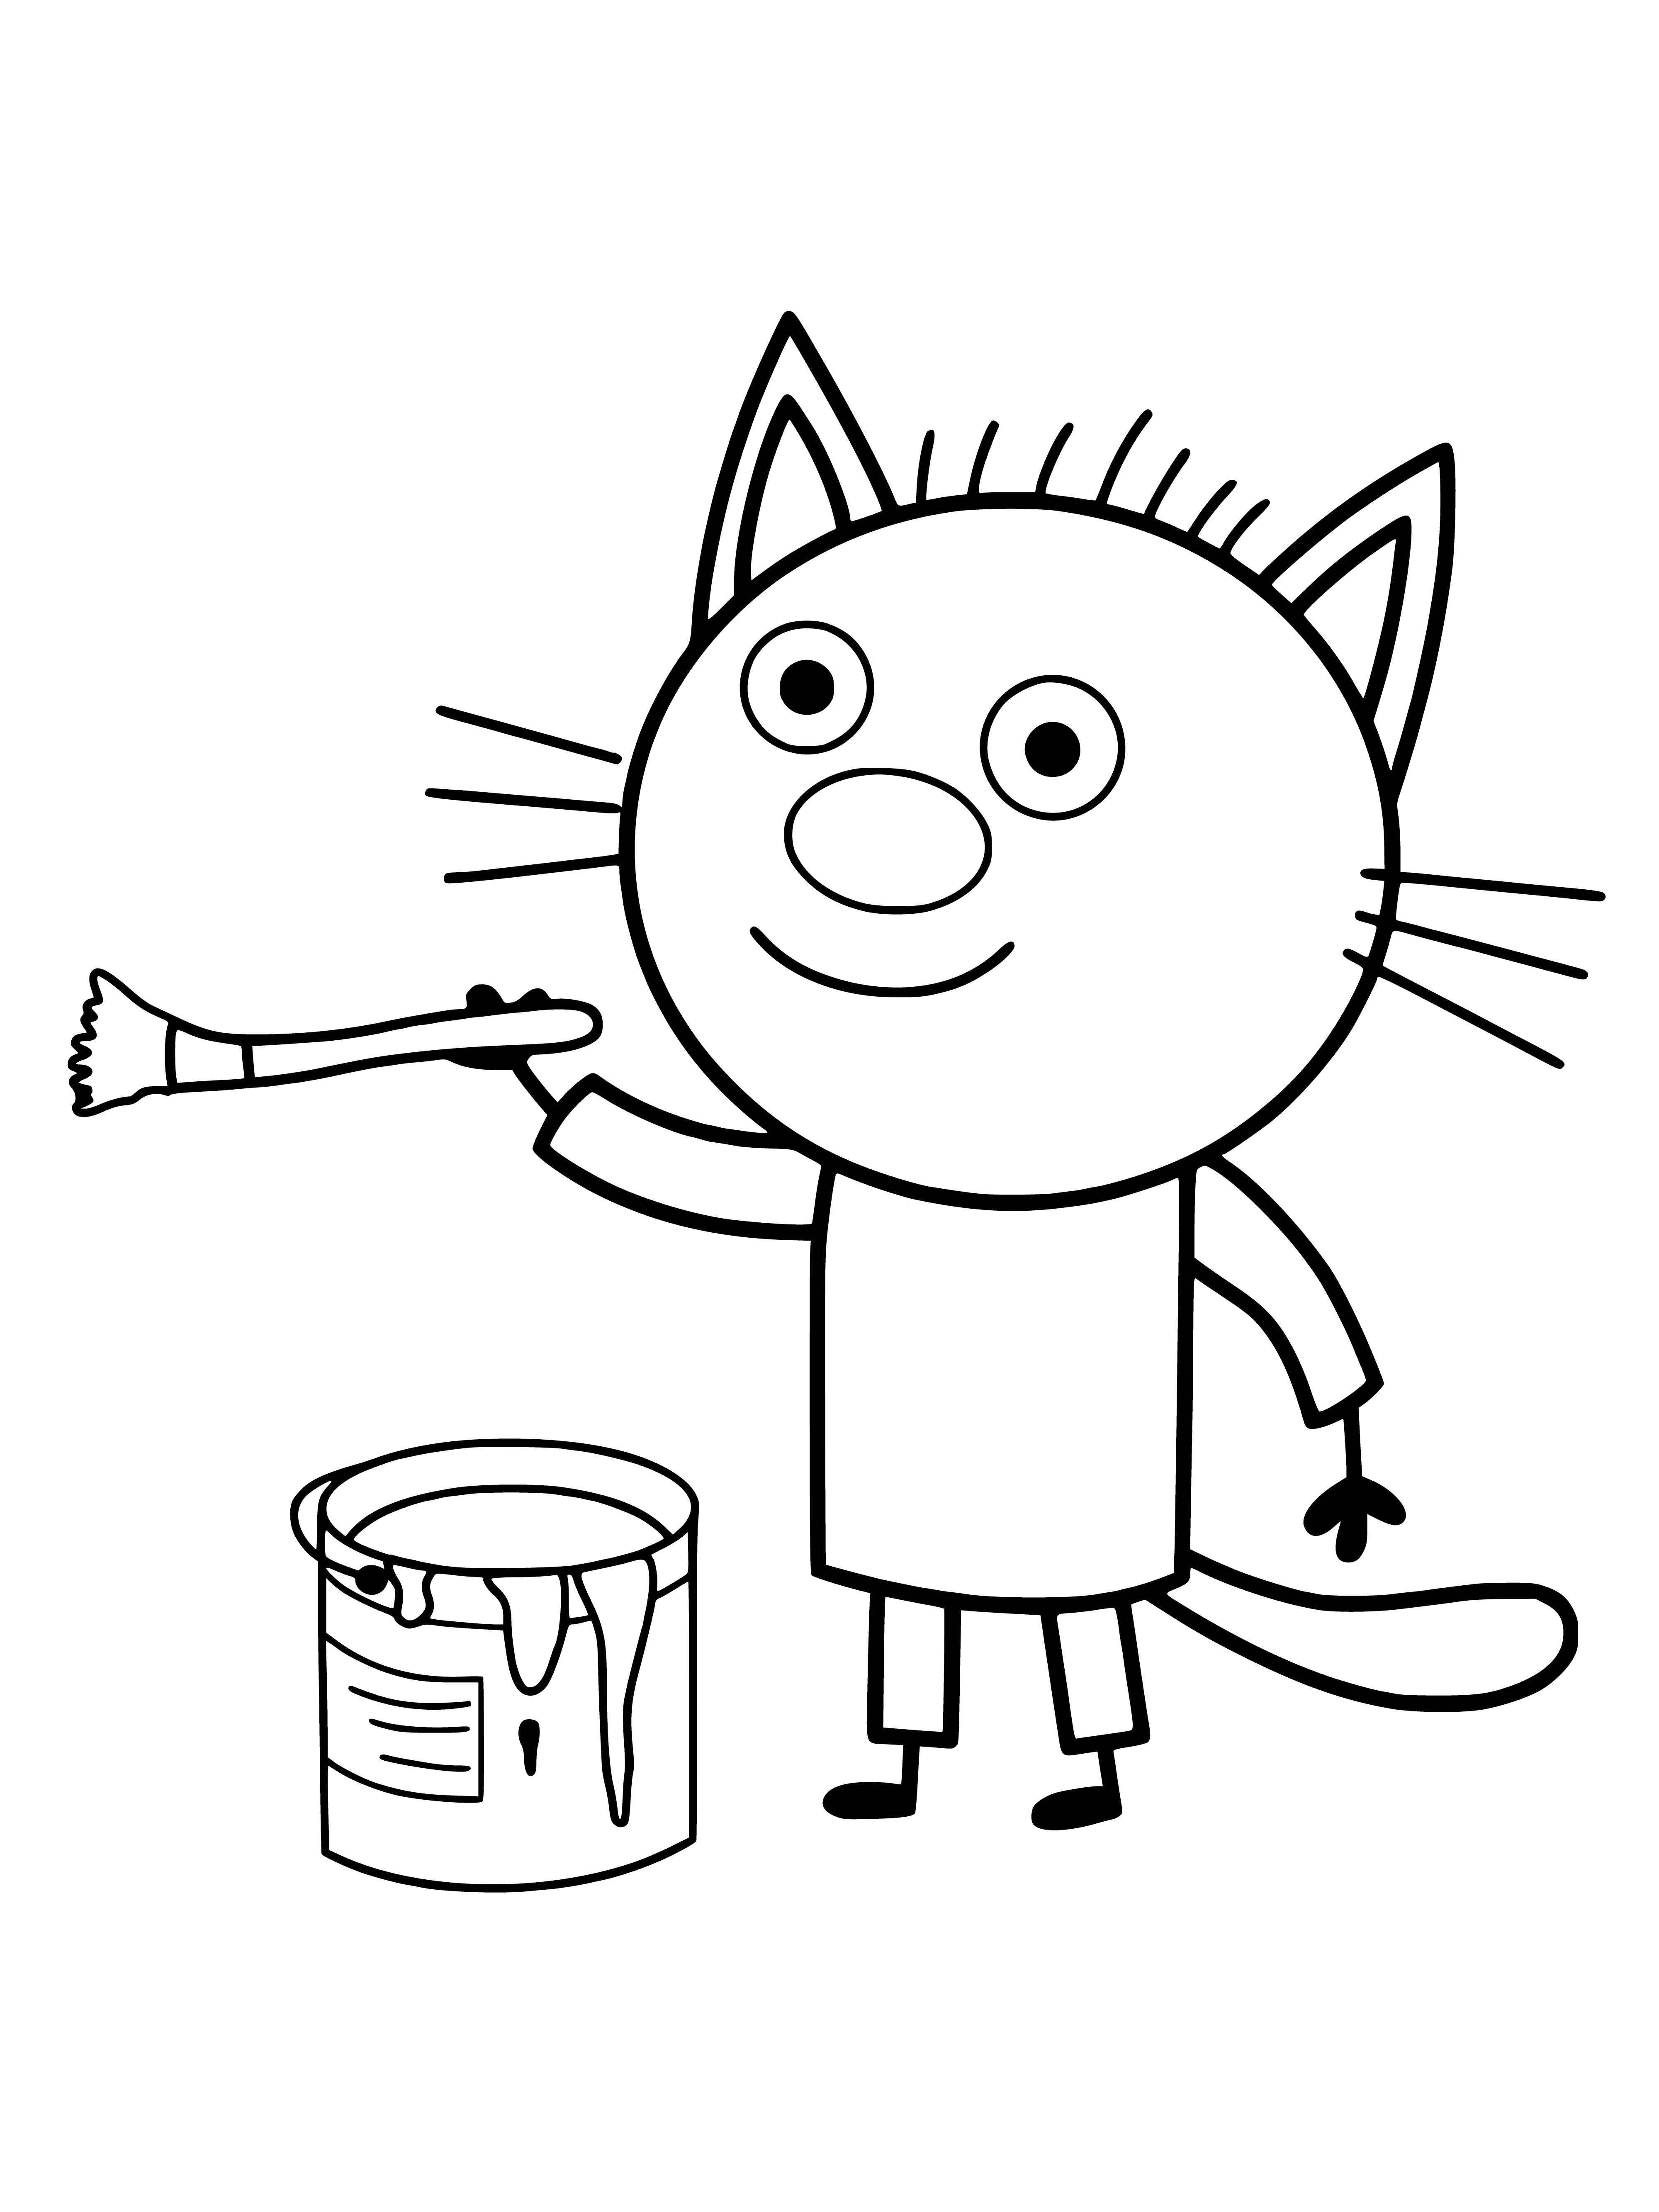 coloring page: 3 cats in coloring page- 2 black, 1 white. One faces camera, other 2 looking away.